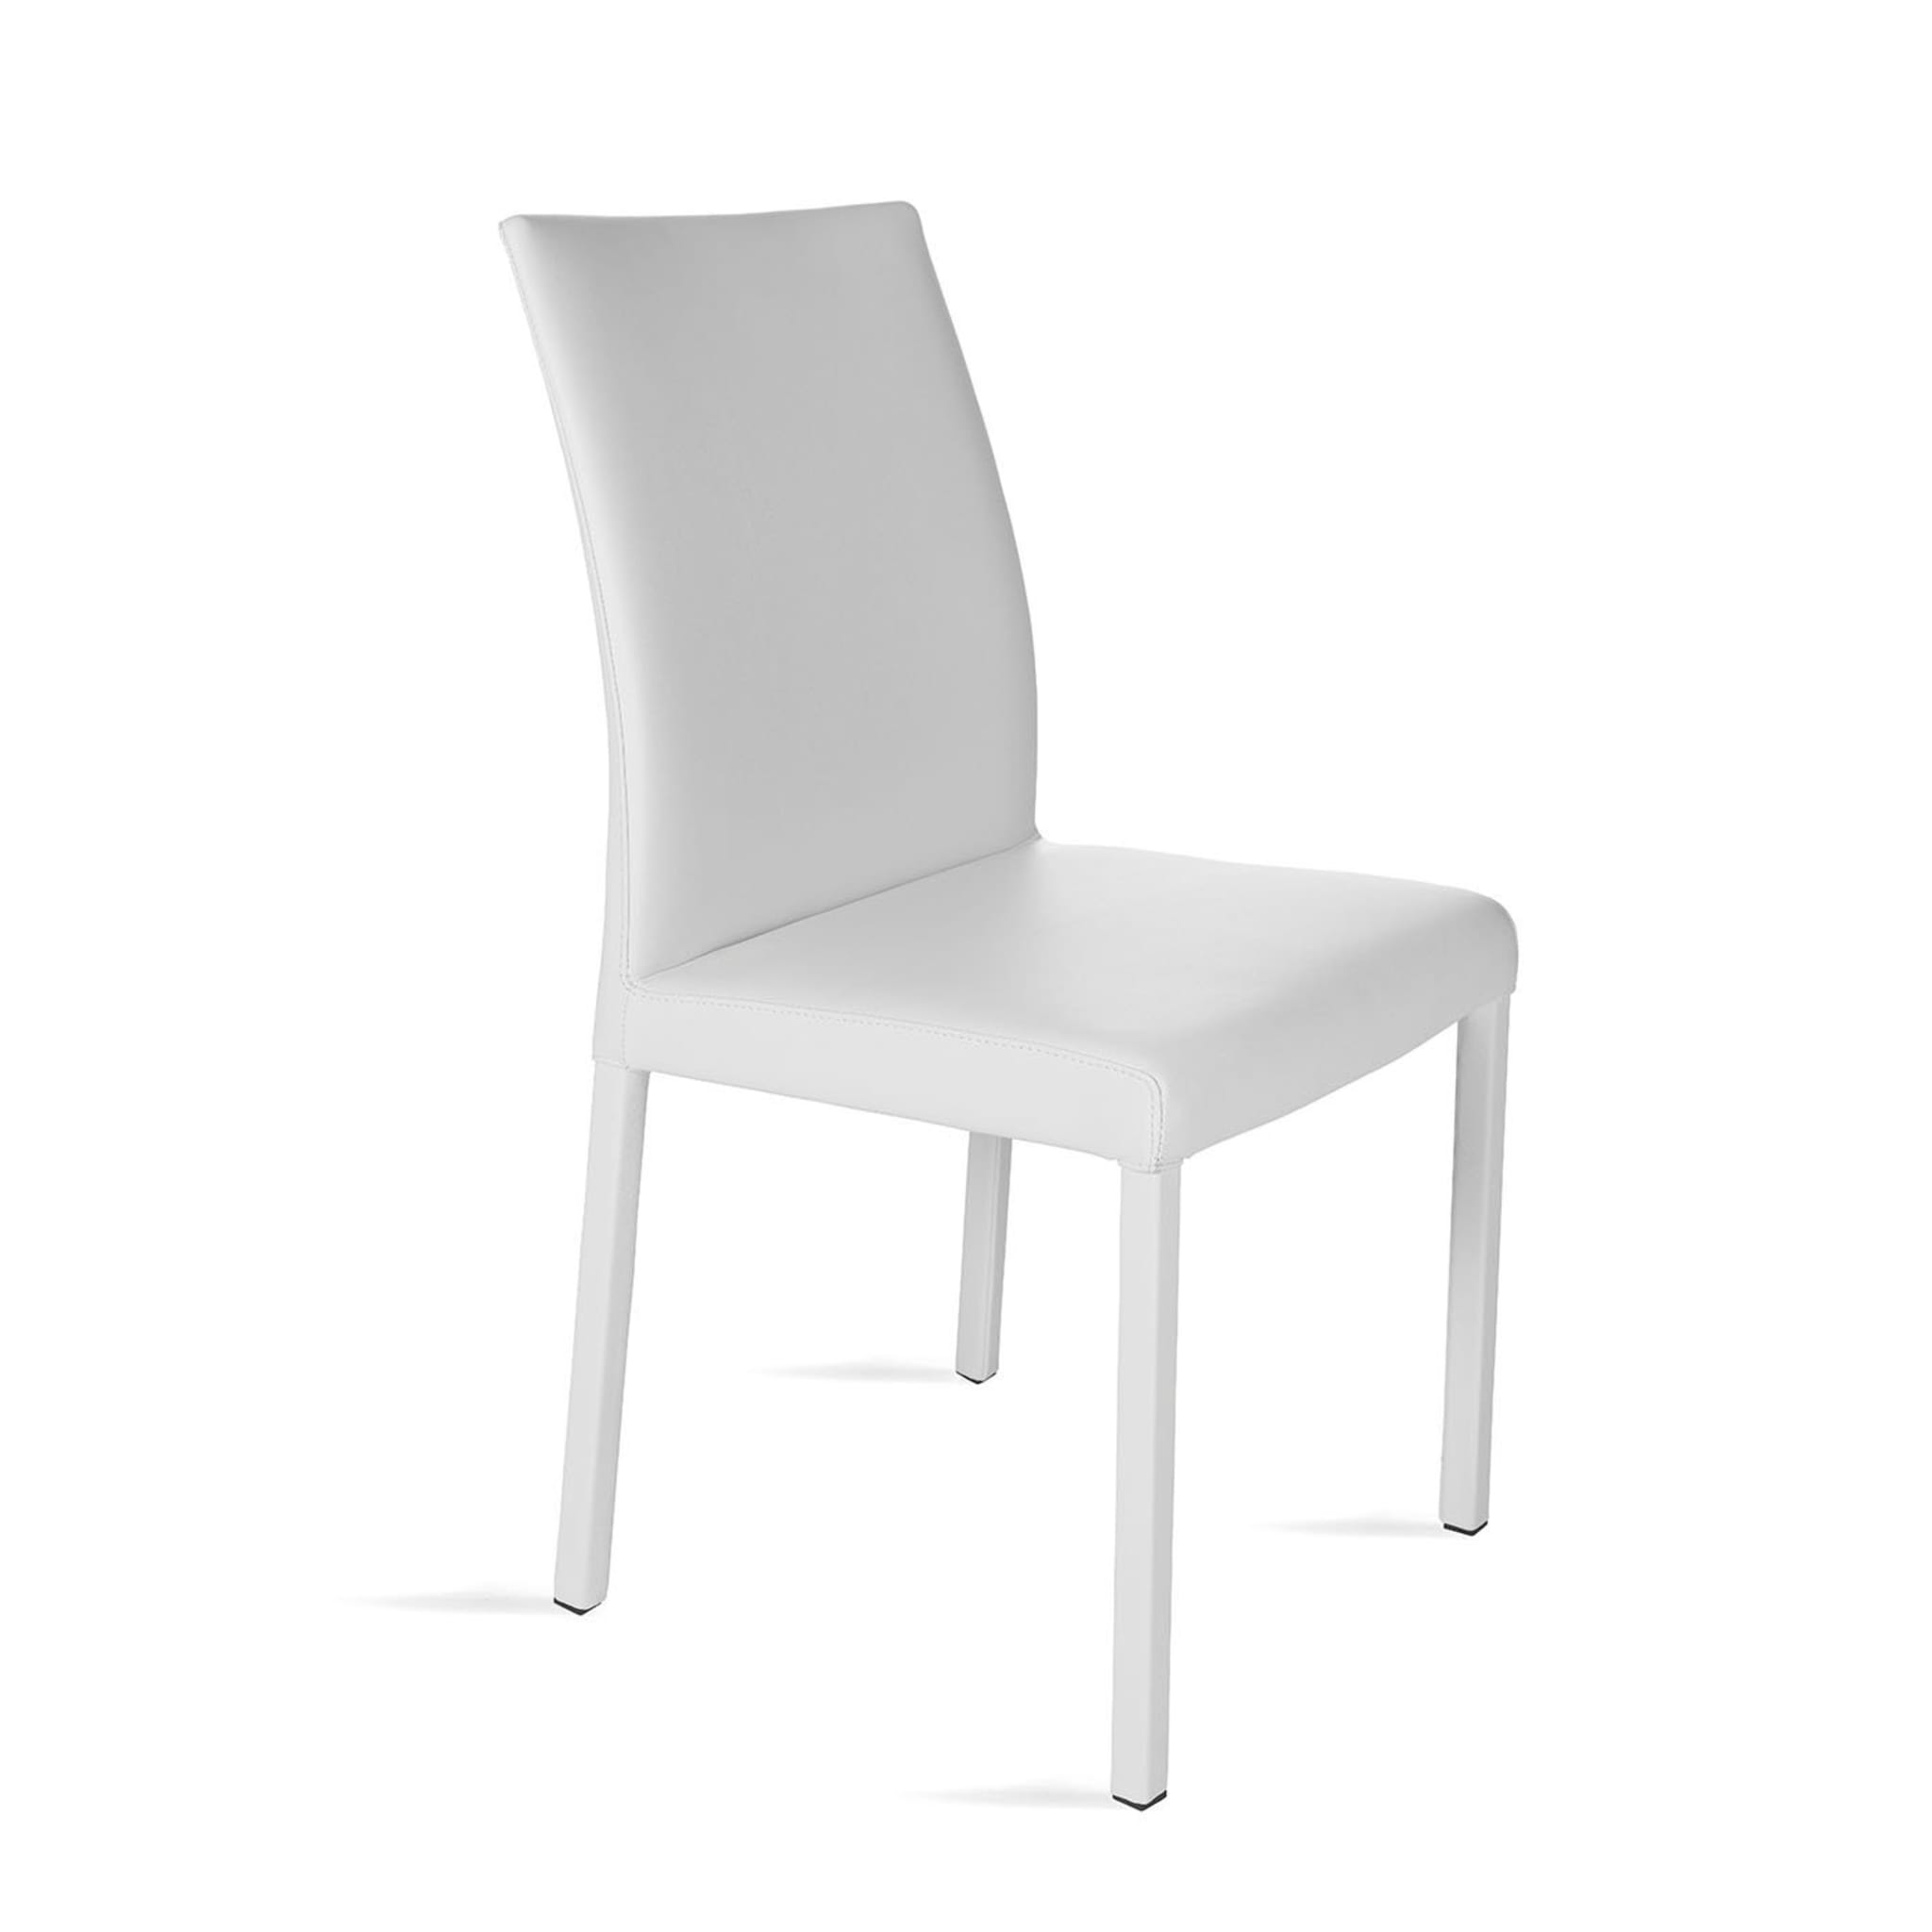 Possagno White Leather XL Chair - Alternative view 1